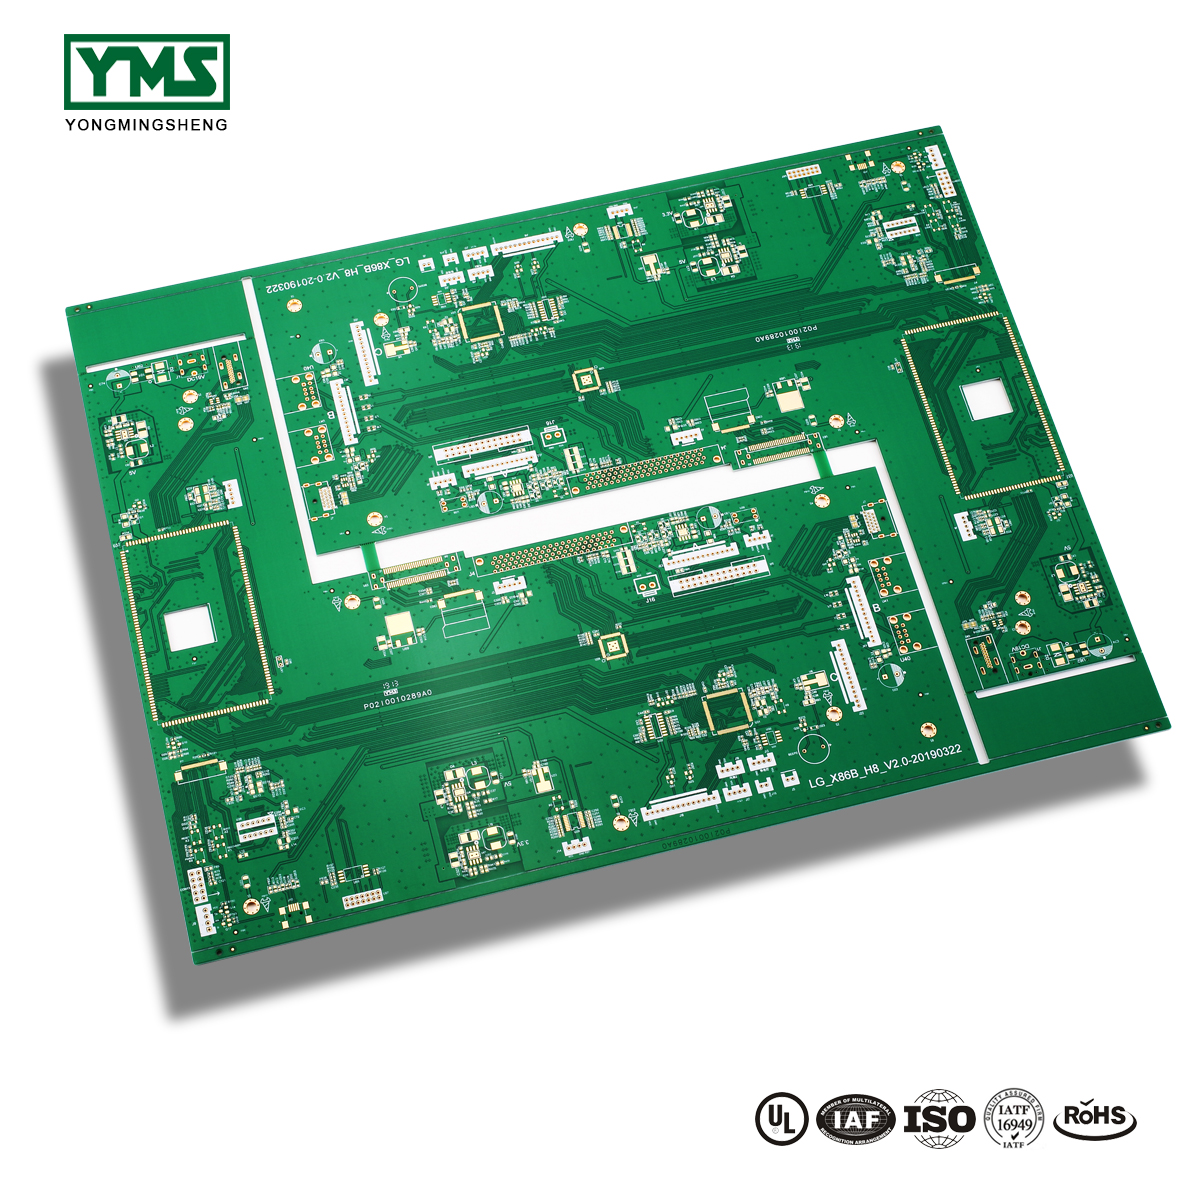 China Manufacturer for Small Printed Circuit Board - Wholesale OEM Iso Certificated Electronic Assembly Assembled Printed Circuit Board (pcb) With Electronic Components – Yongmingsheng